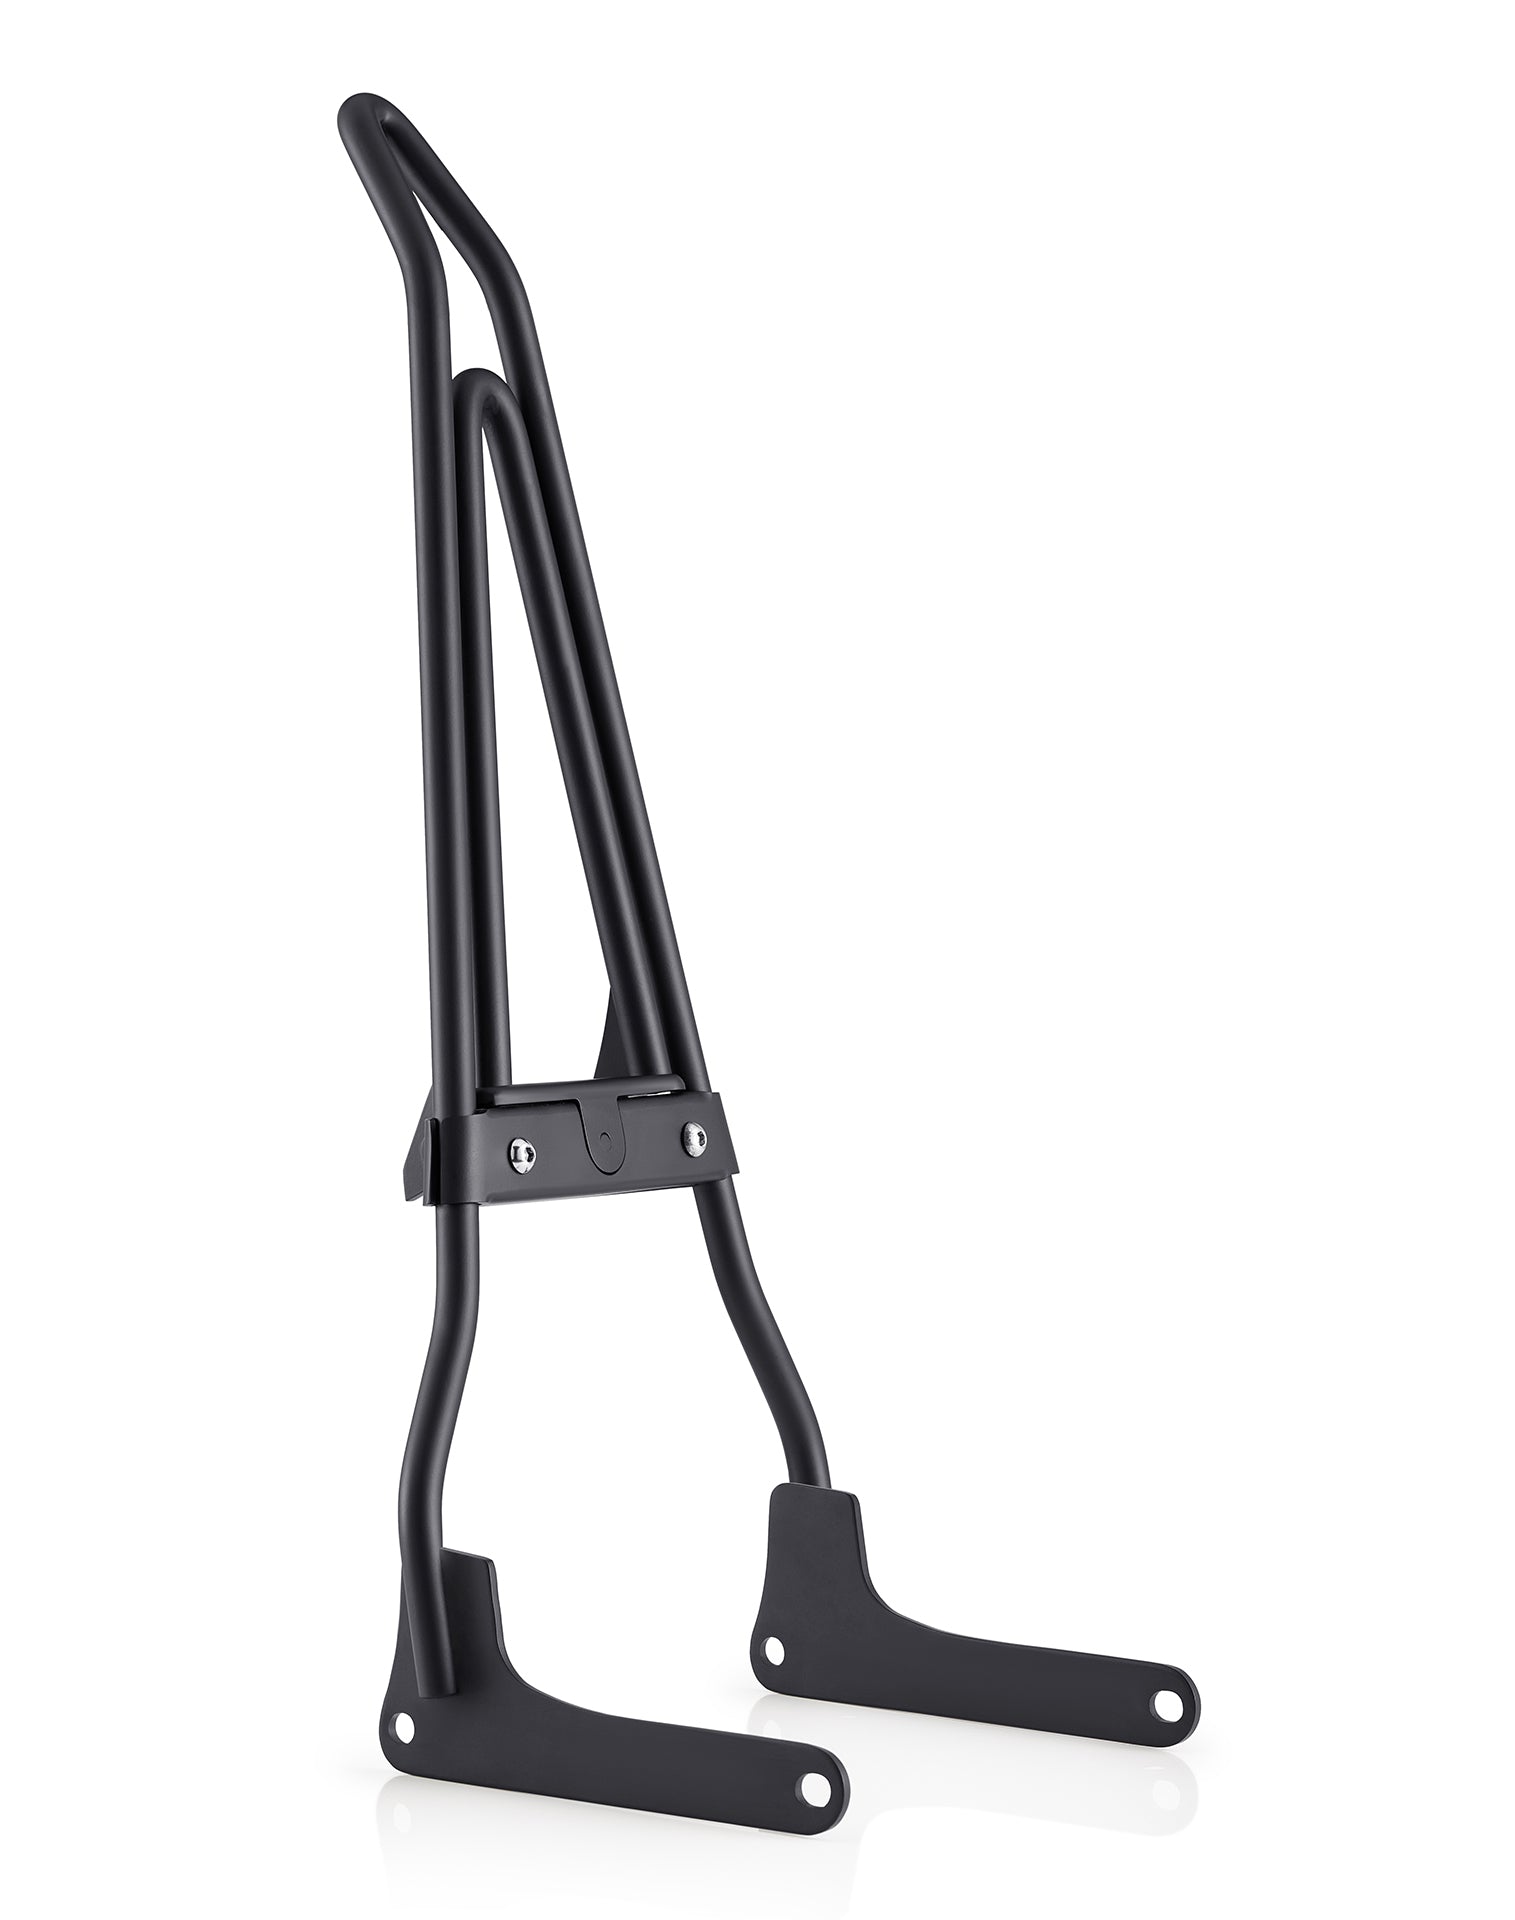 Iron Born Blade 25" Sissy Bar with Foldable Luggage Rack for Harley Softail Low Rider Matte Black